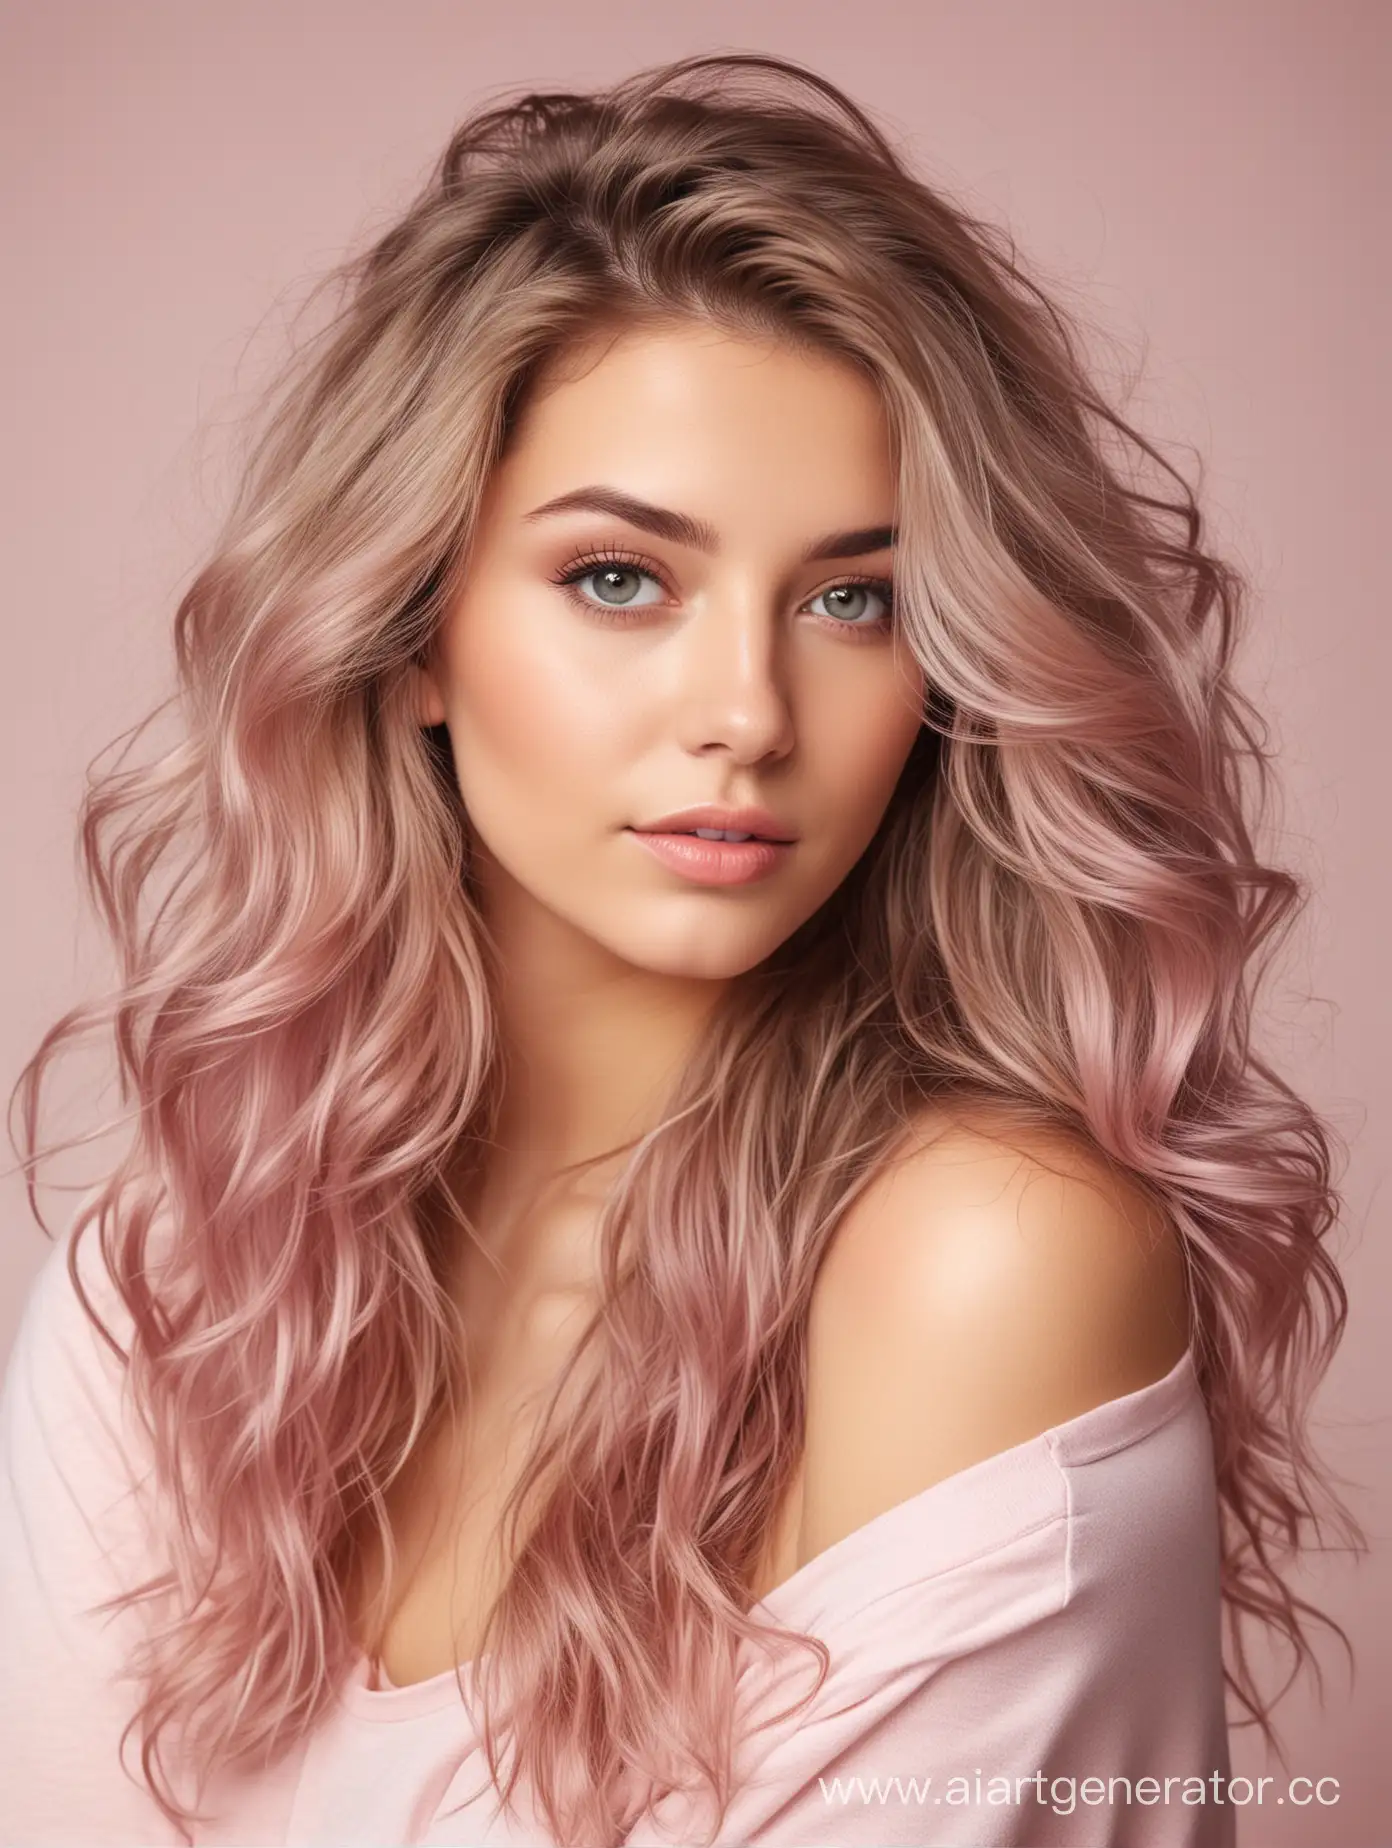 Ethereal-Portrait-of-a-Young-Woman-with-Lush-Pastel-Hair